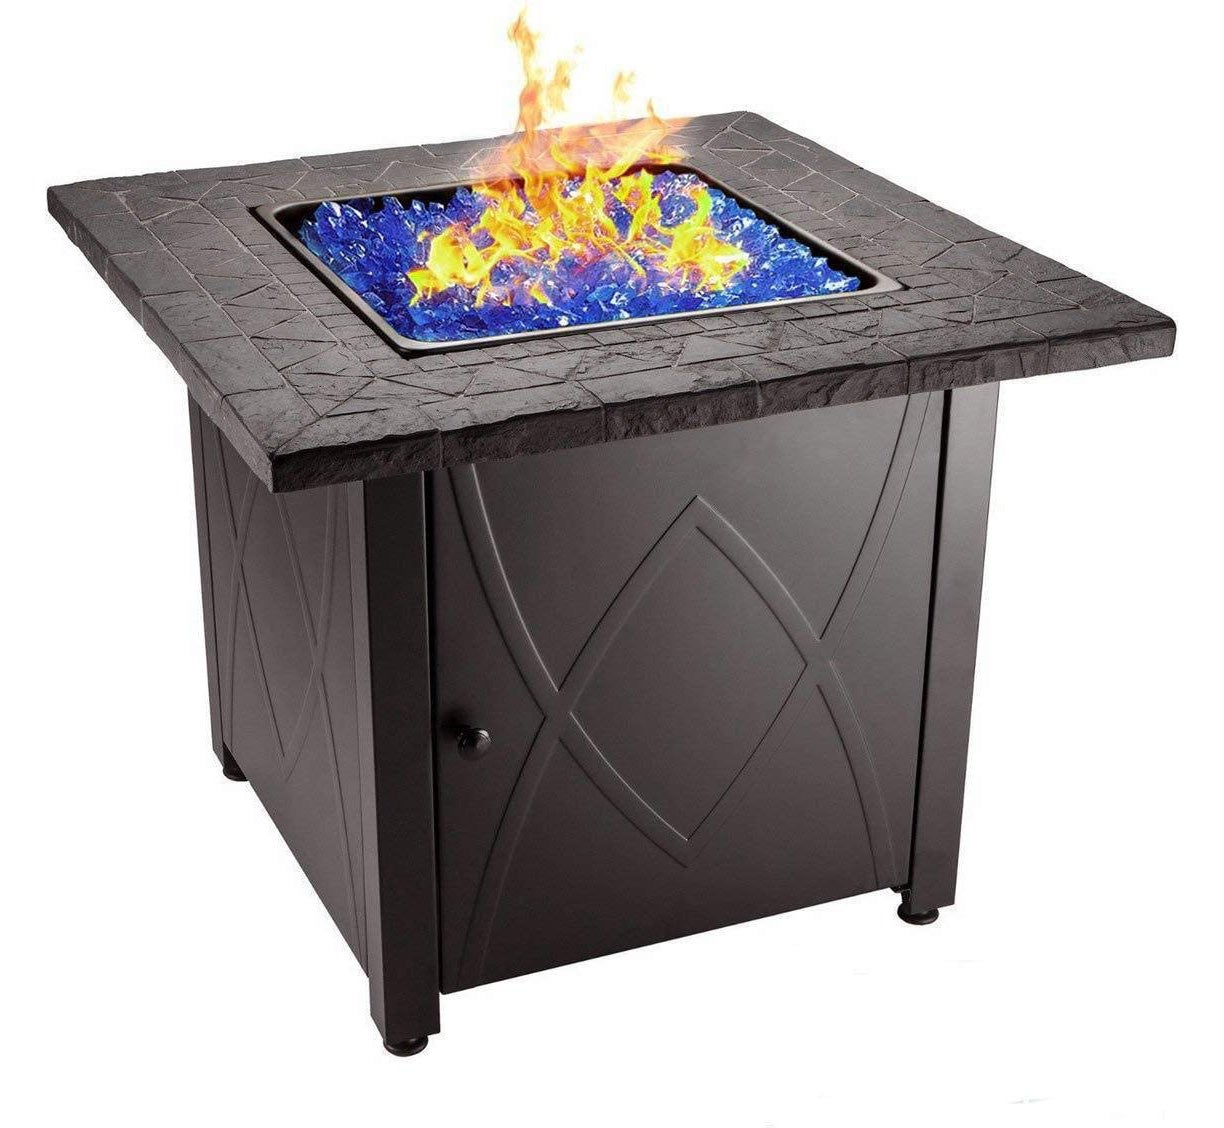 Endless Summer Outdoor Propane Gas Fire Pit Table